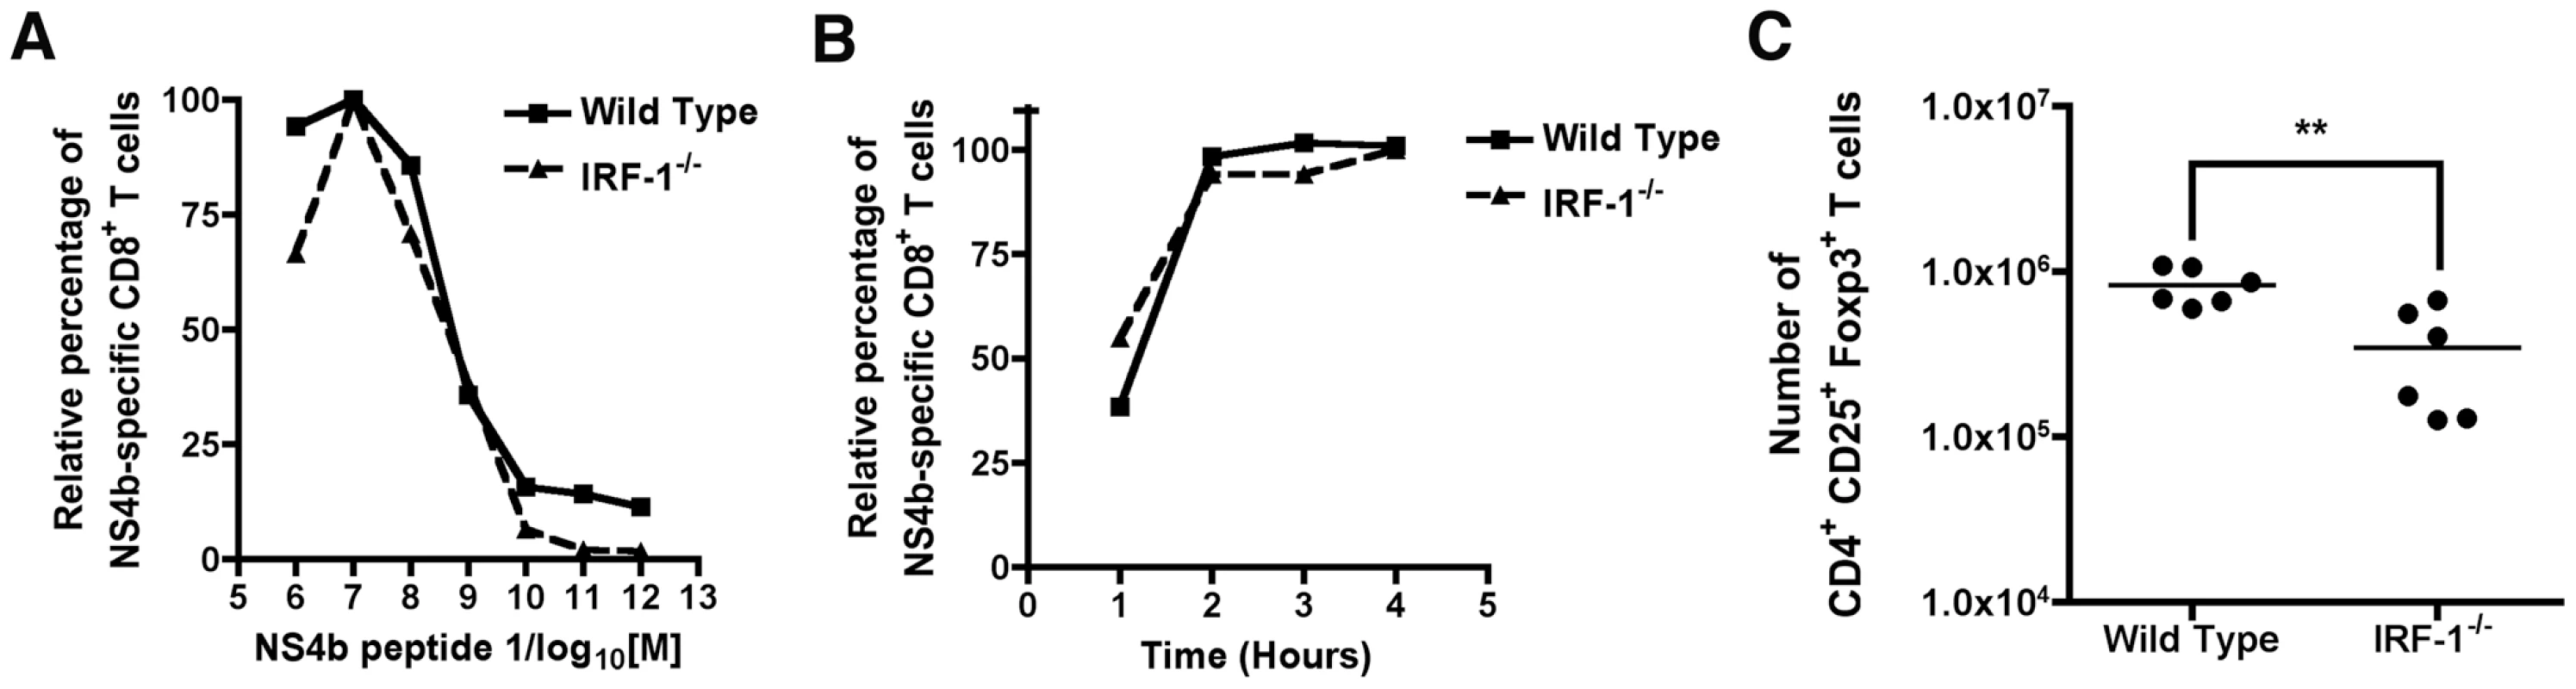 Mechanism of selective expansion of WNV-specific CD8<sup>+</sup> T cells in <i>IRF-1</i><sup>-/-</sup> mice.